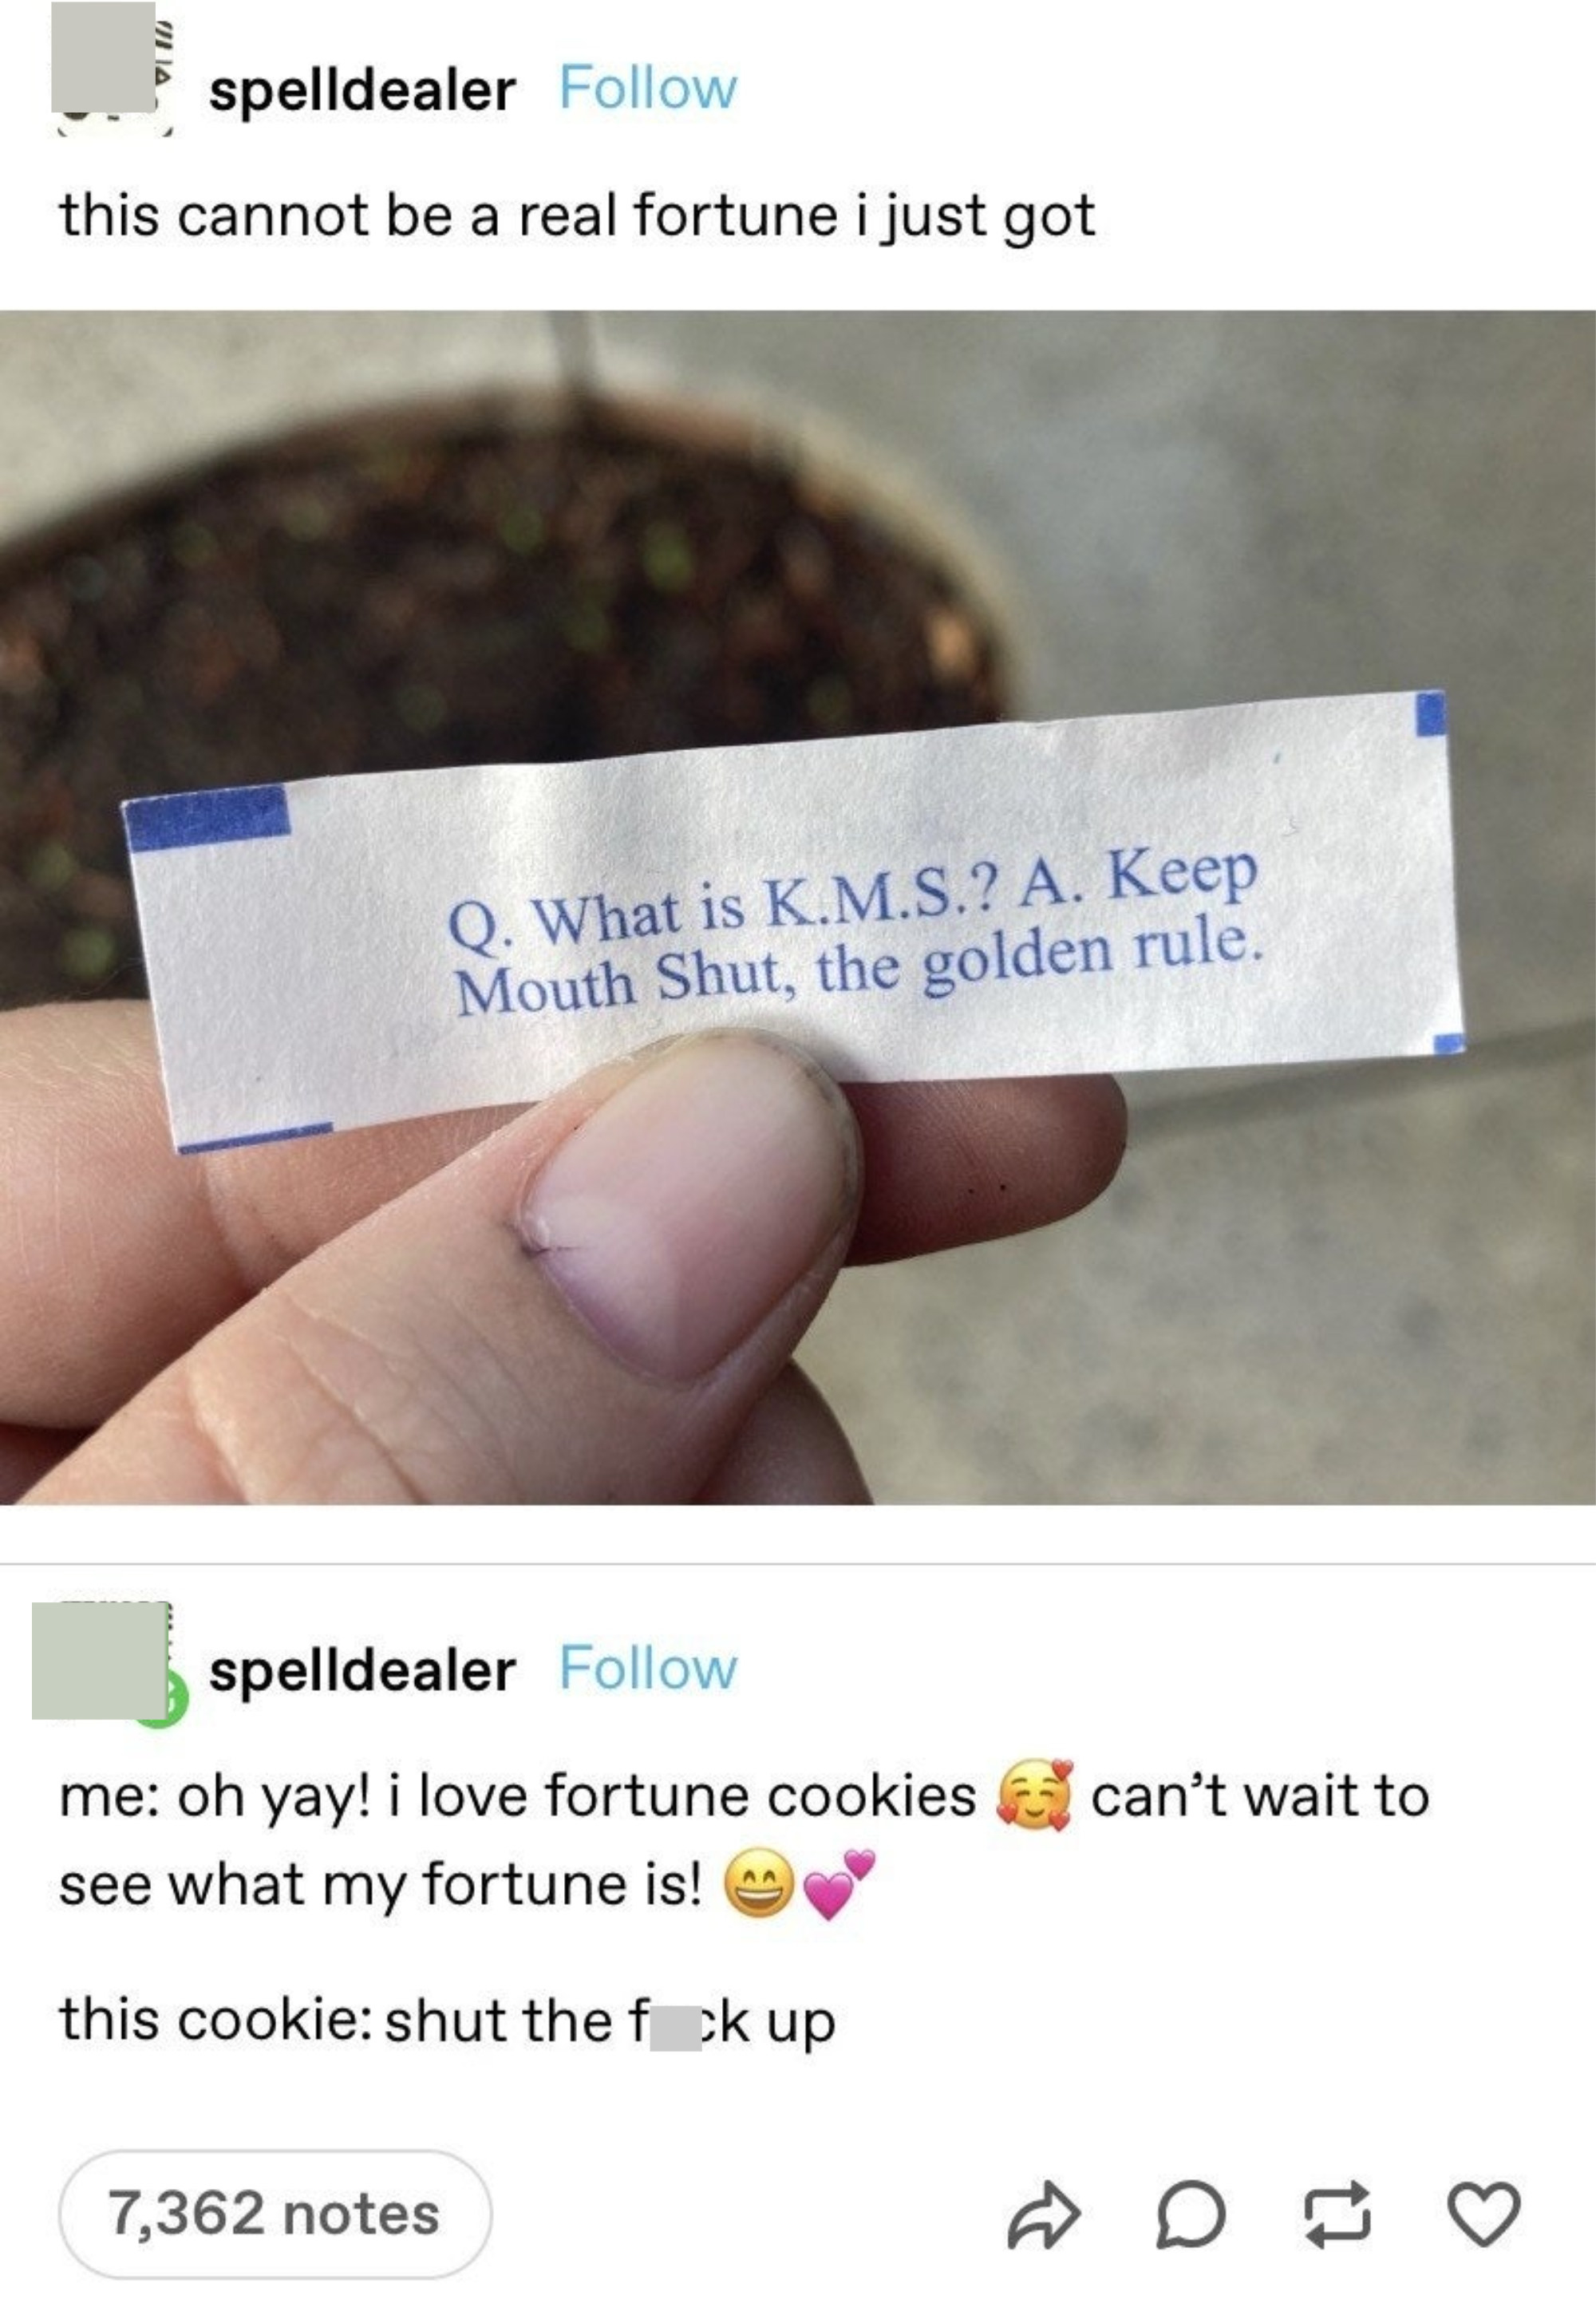 Person can&#x27;t believe they got a fortune cookie that says &quot;KMS means Keep Mouth Shut, the golden rule&quot; and they describe it as &quot;Oh yay, I love fortune cookies, can&#x27;t wait to see what my fortune is&quot; and &quot;This cookie: Shut the fuck up&quot;